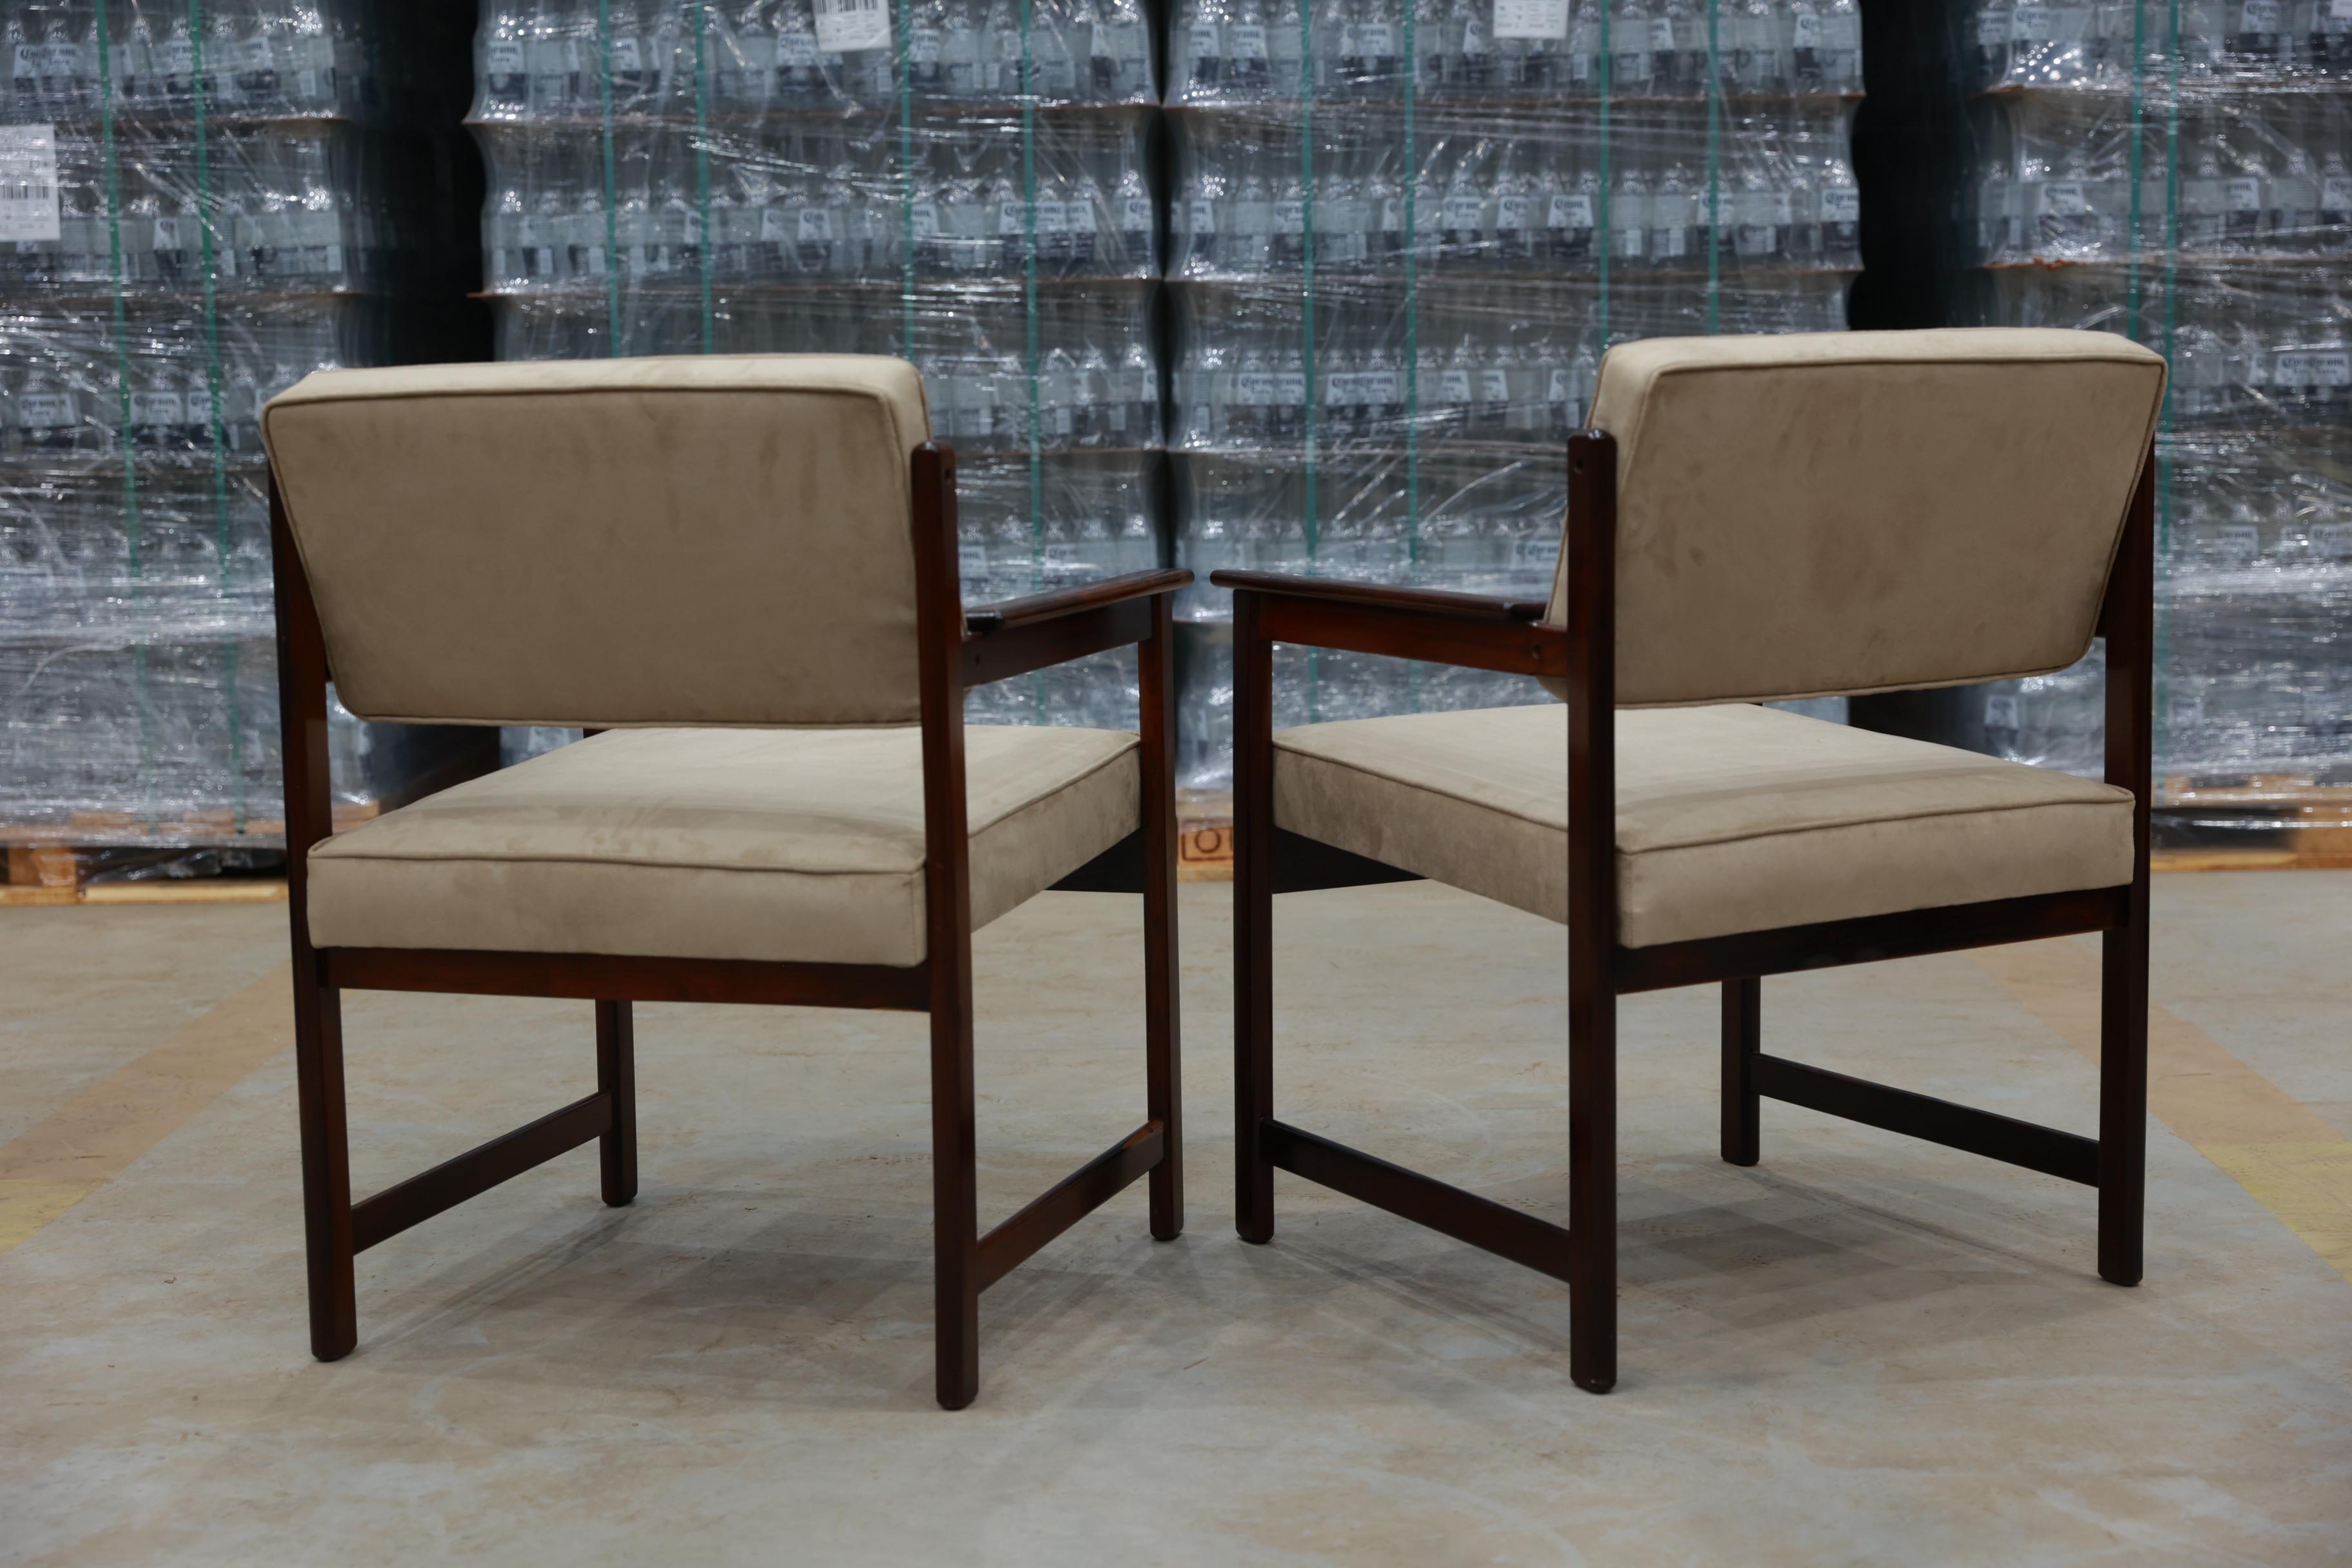 Midcentury Modern Armchairs in Hardwood & Beige Fabric by Jorge Jabour, Brazil In Good Condition For Sale In New York, NY